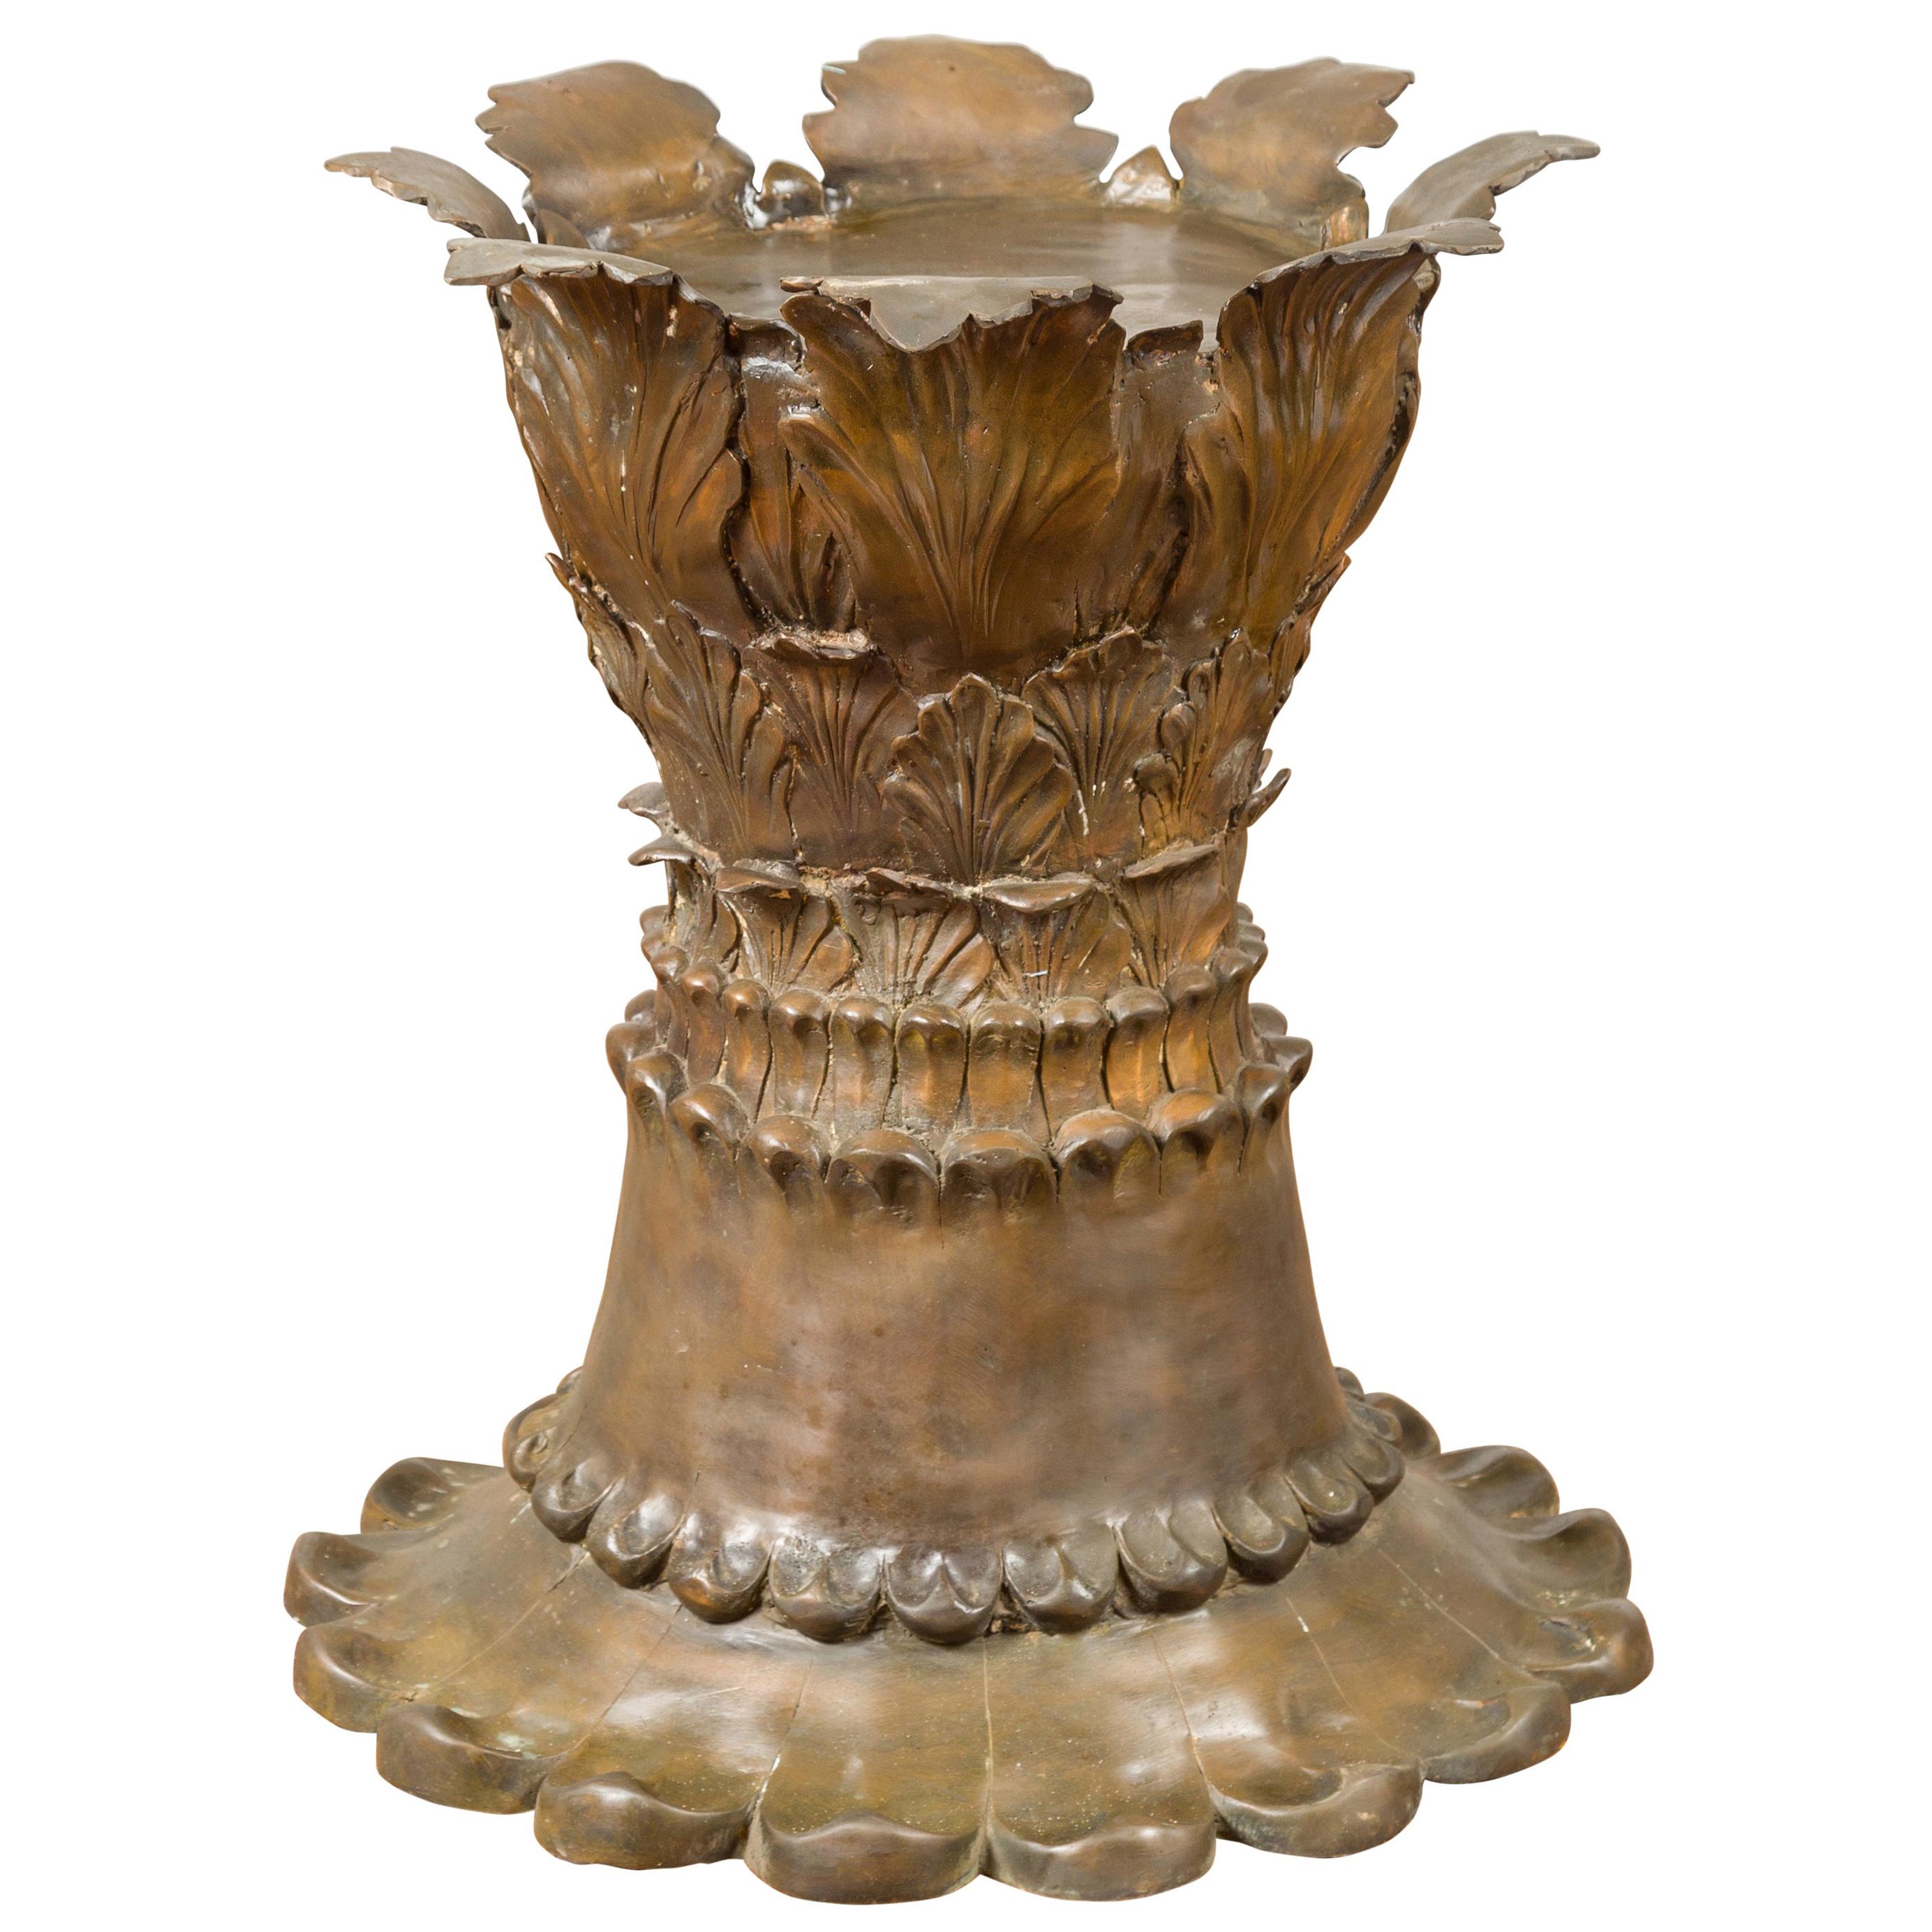 Bronze Flower Pedestal with Acanthus Leaves and Palmettes, Contemporary